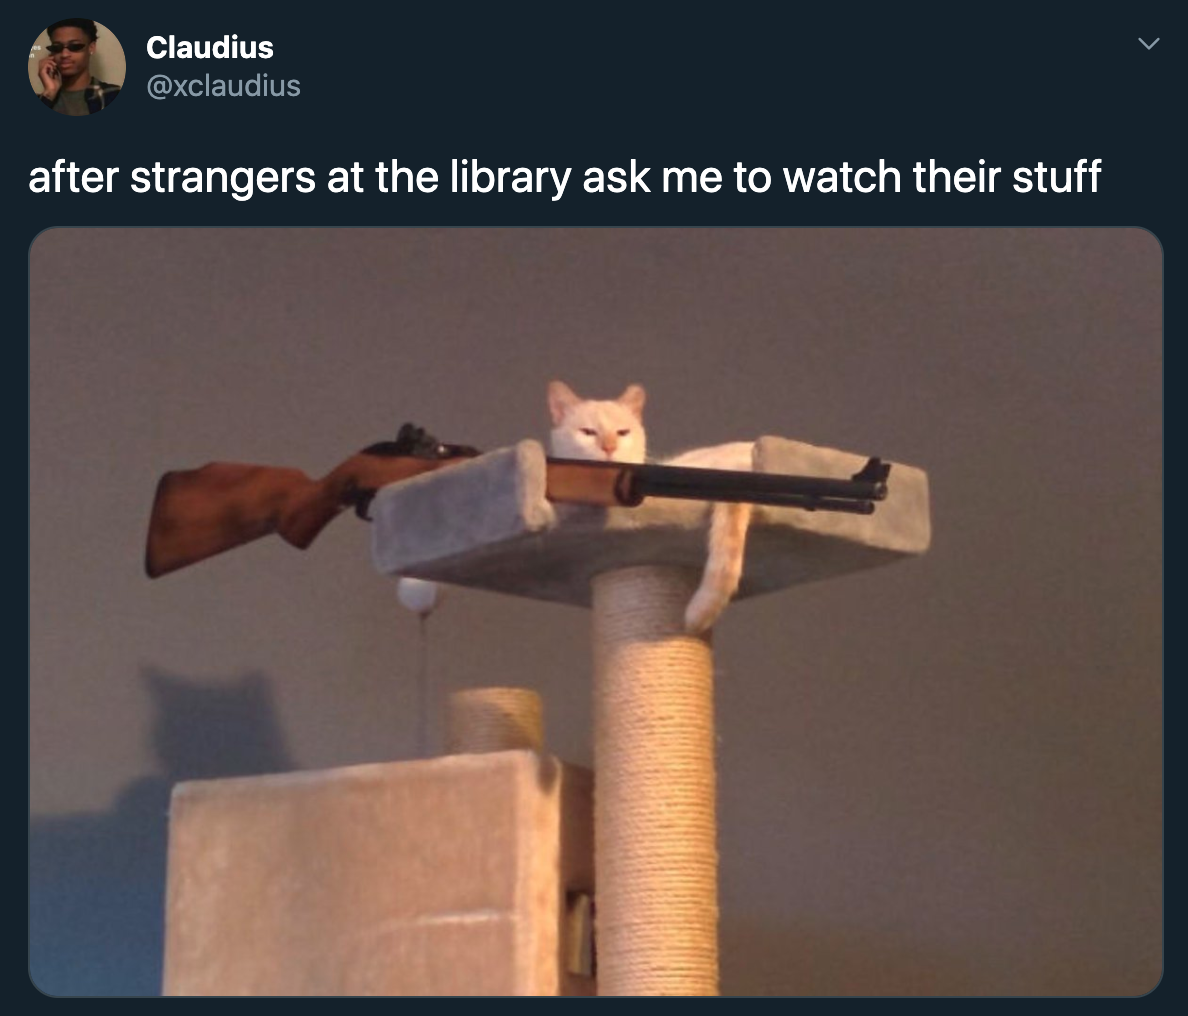 after strangers at the library ask me to watch their stuff